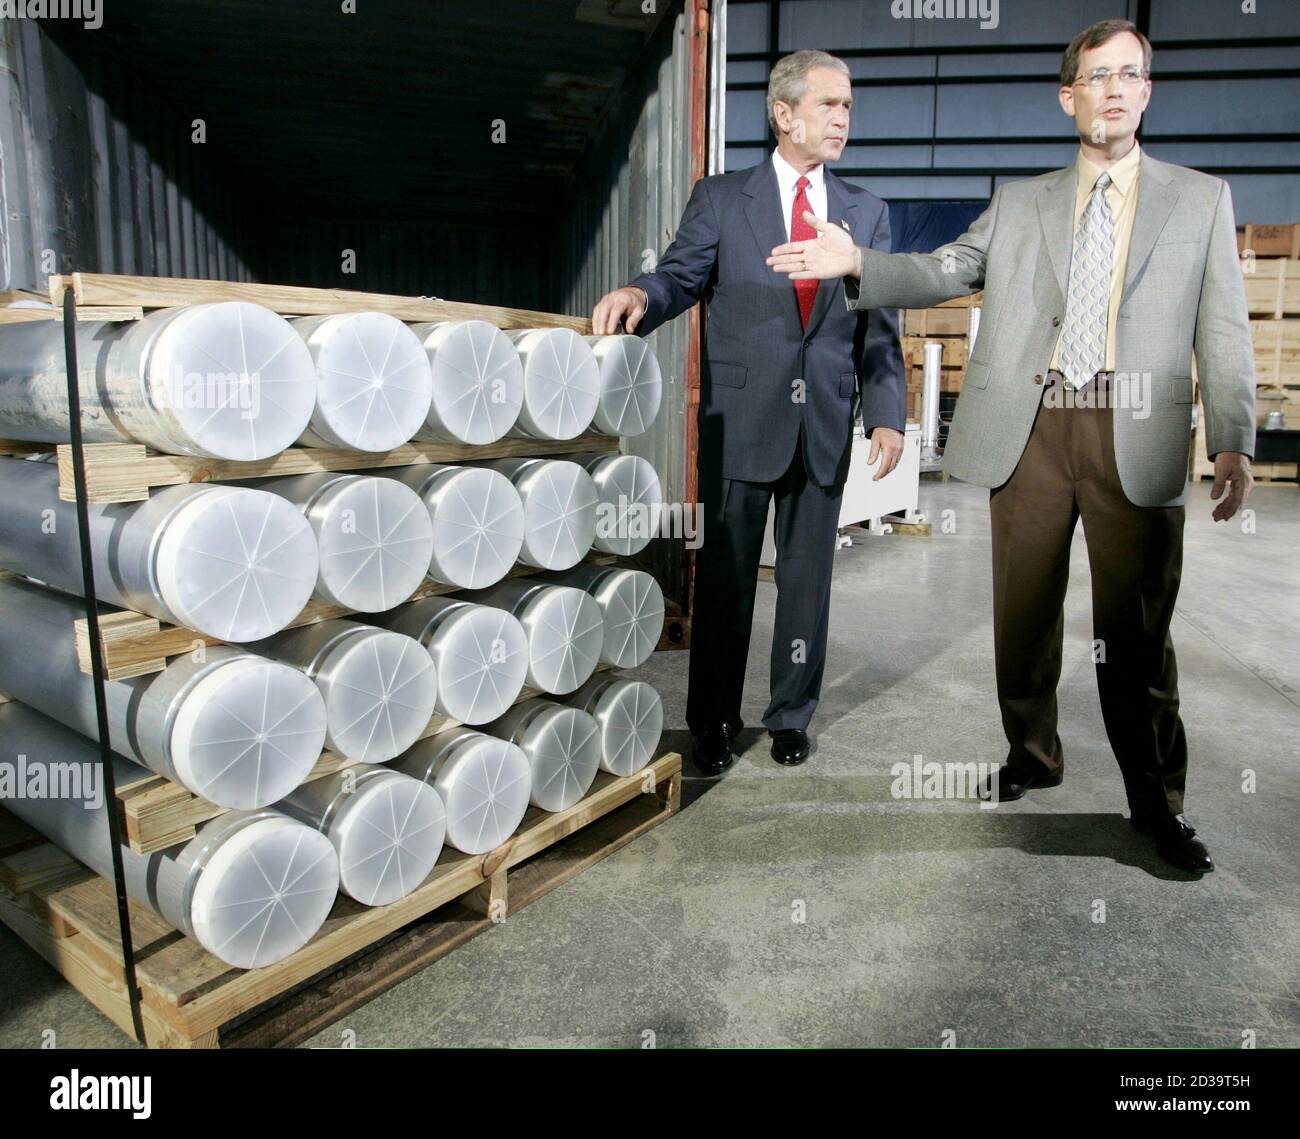 U.S. President George W. Bush tours a display of materials and equipment collected in Libya with the Manager of National Security Advanced Technologies, Jon Kreykes (R), in the Fusion Building of the Oak Ridge National Laboratory in Tennessee, July 12, 2004. Stock Photo